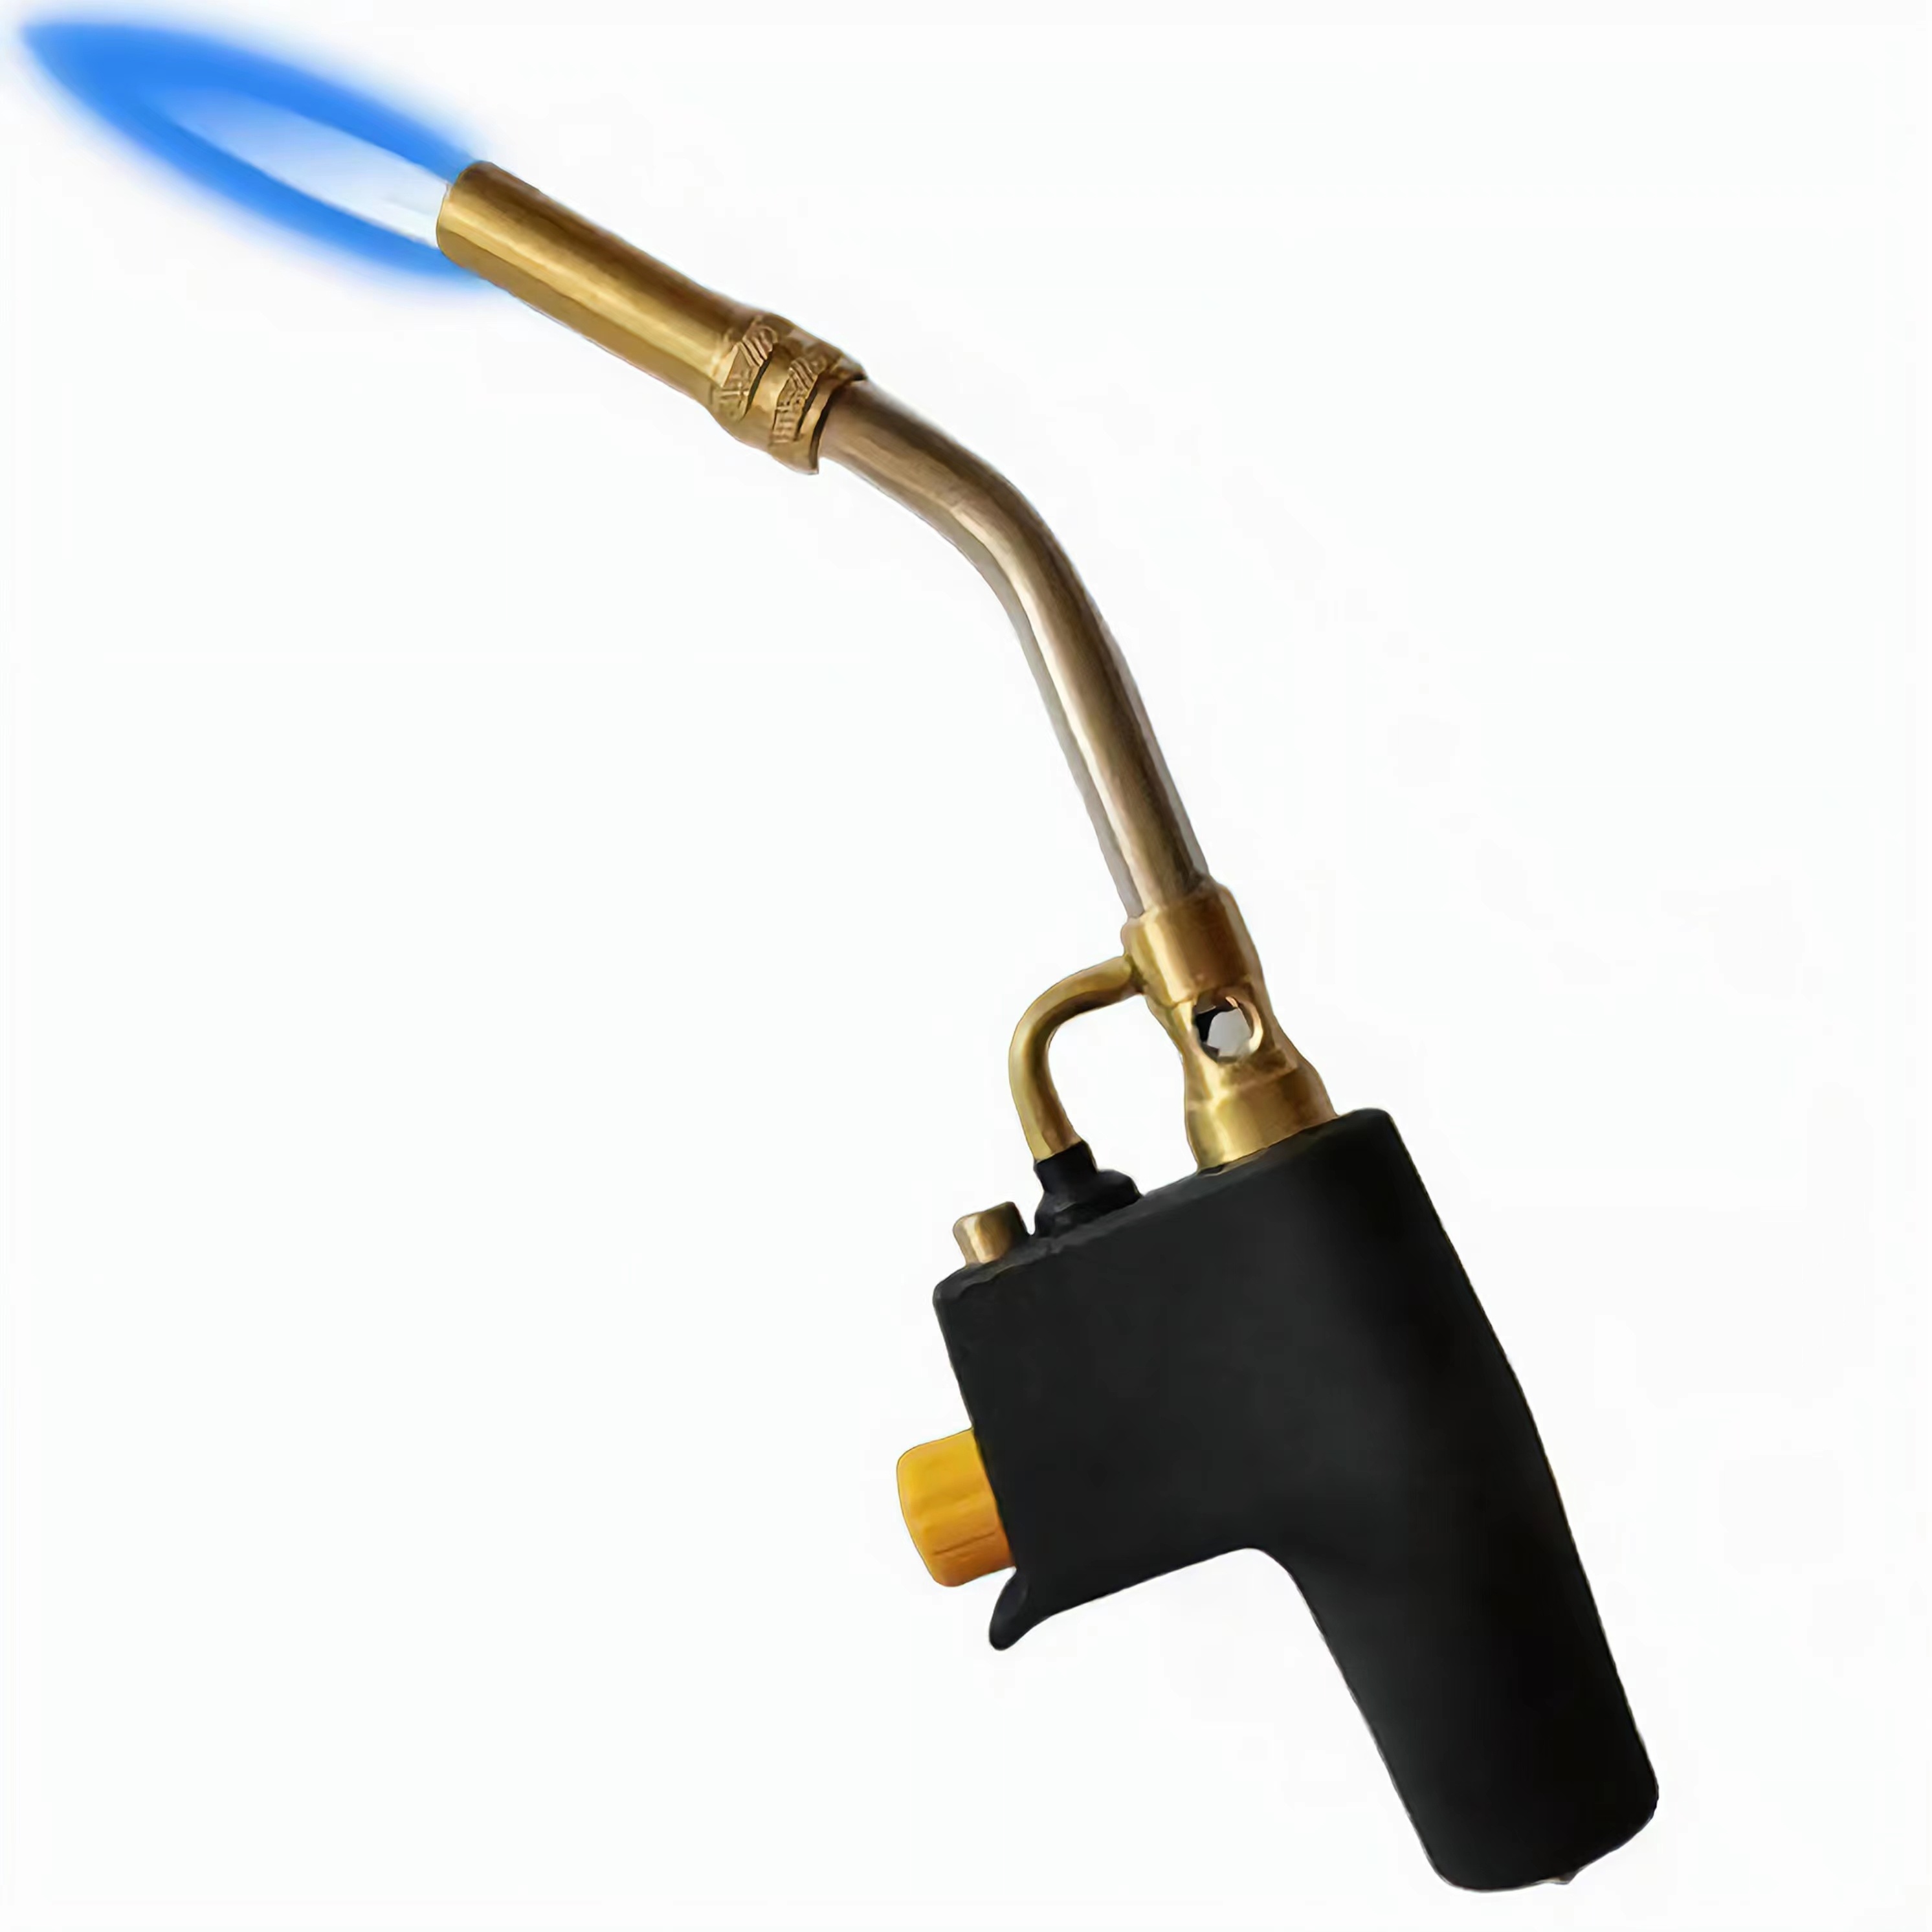 The Tactical Propane Blowtorch